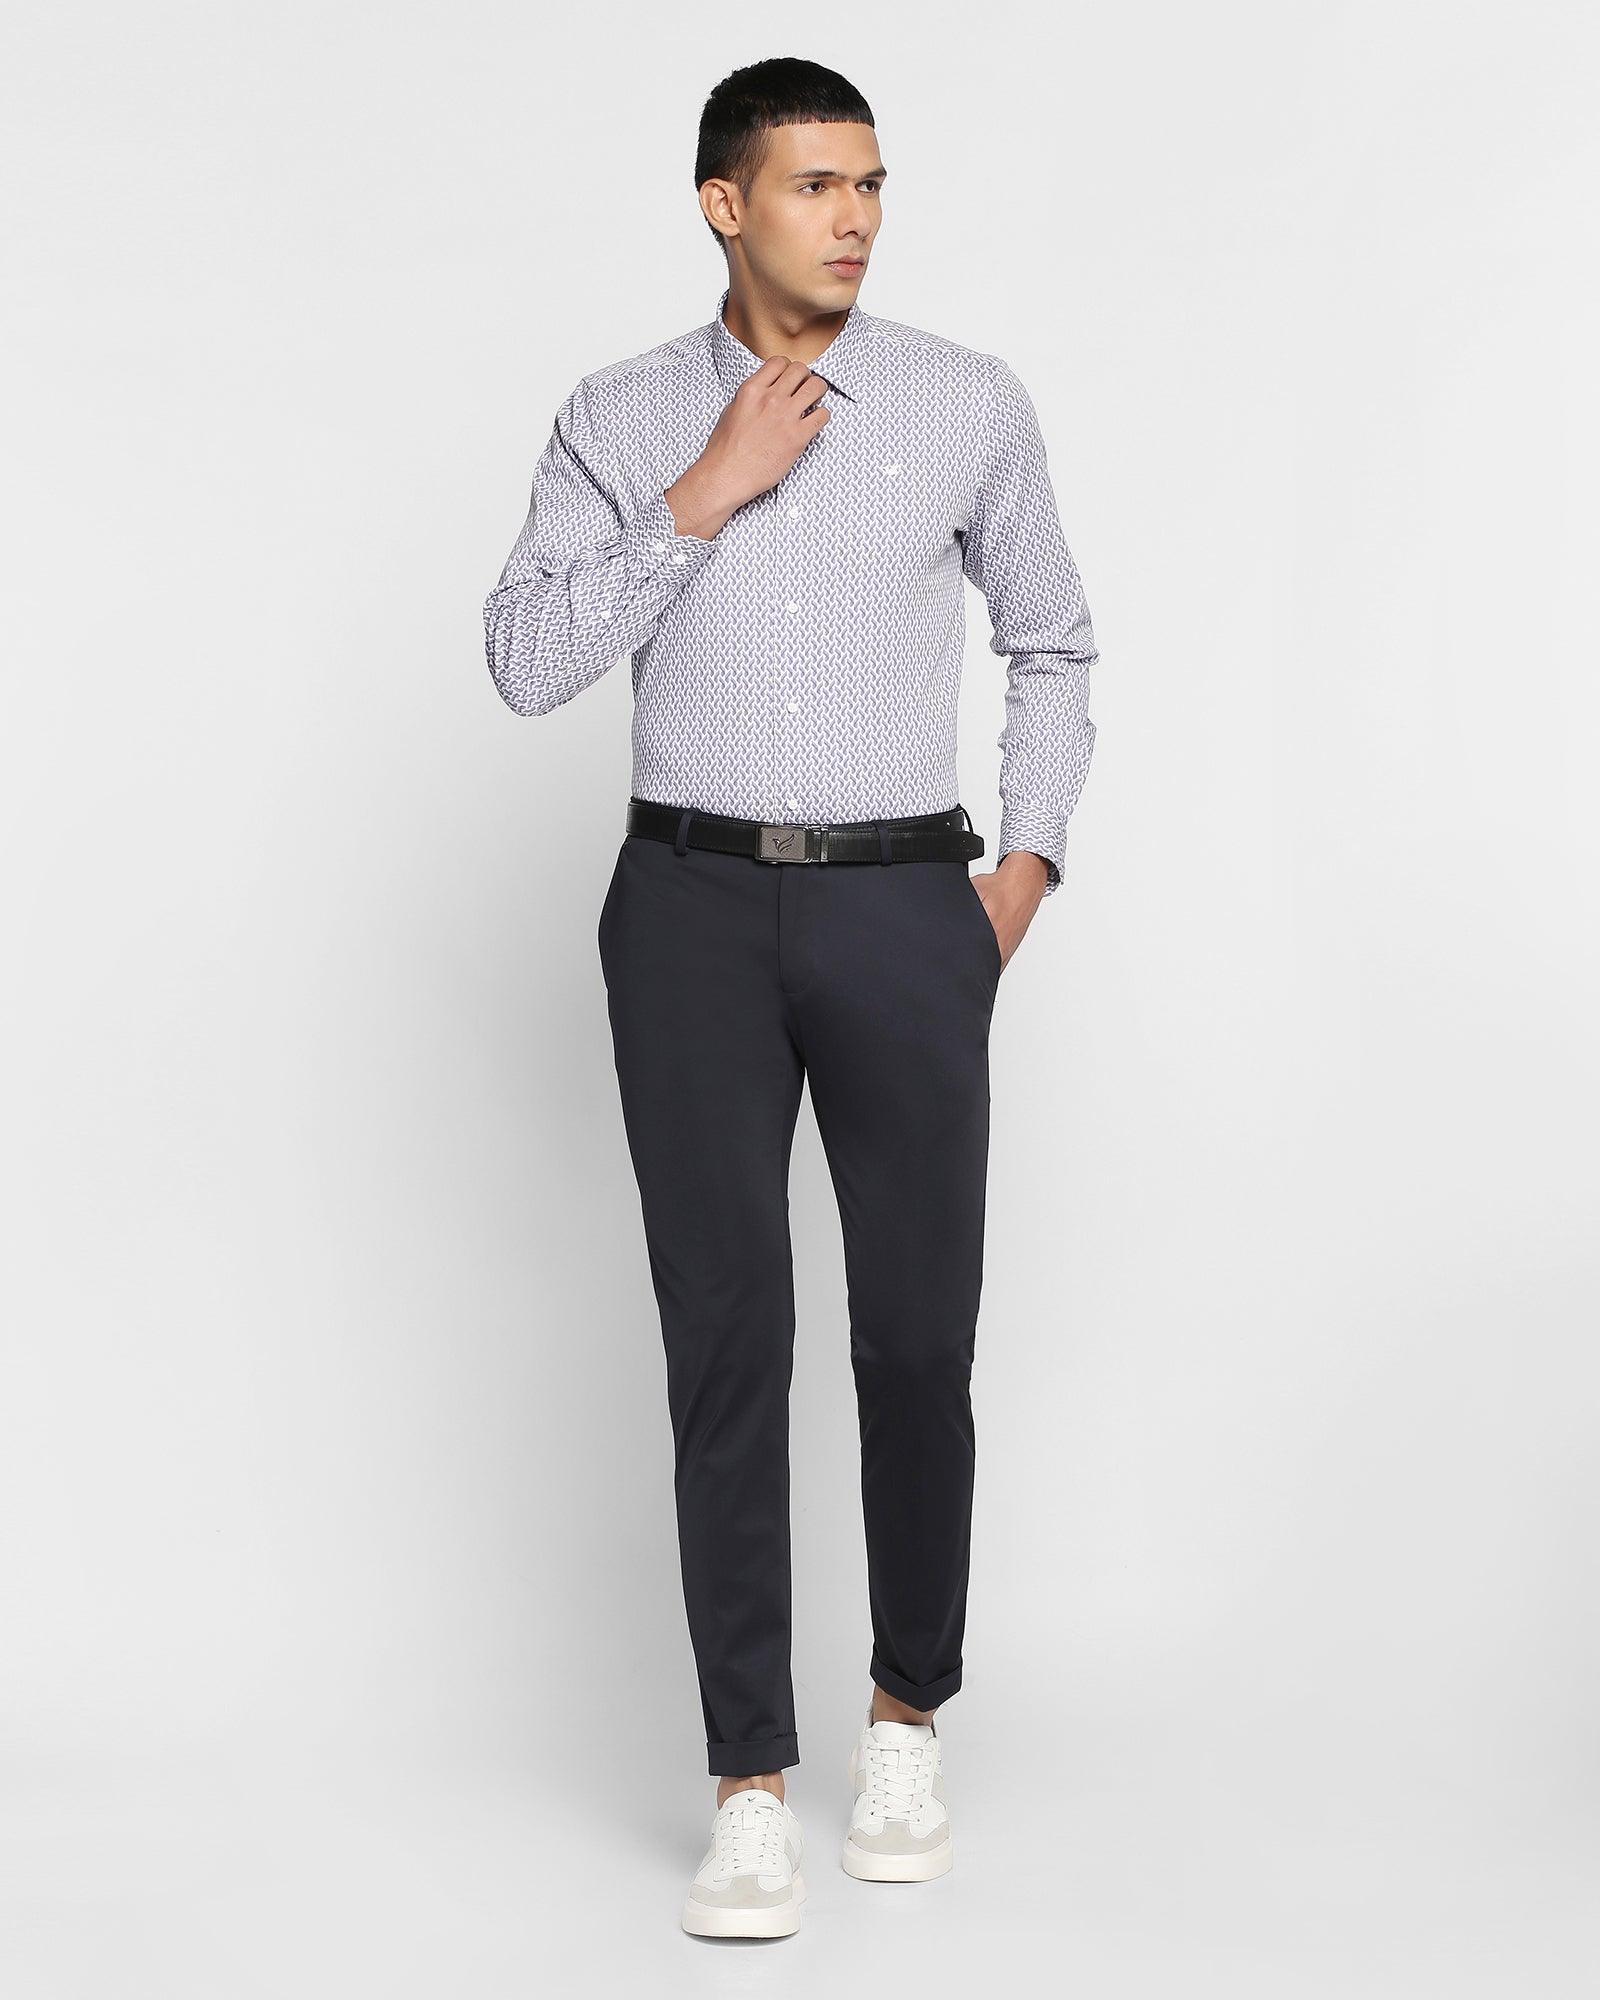 TechPro Formal Lilac Printed Shirt - Wellinger